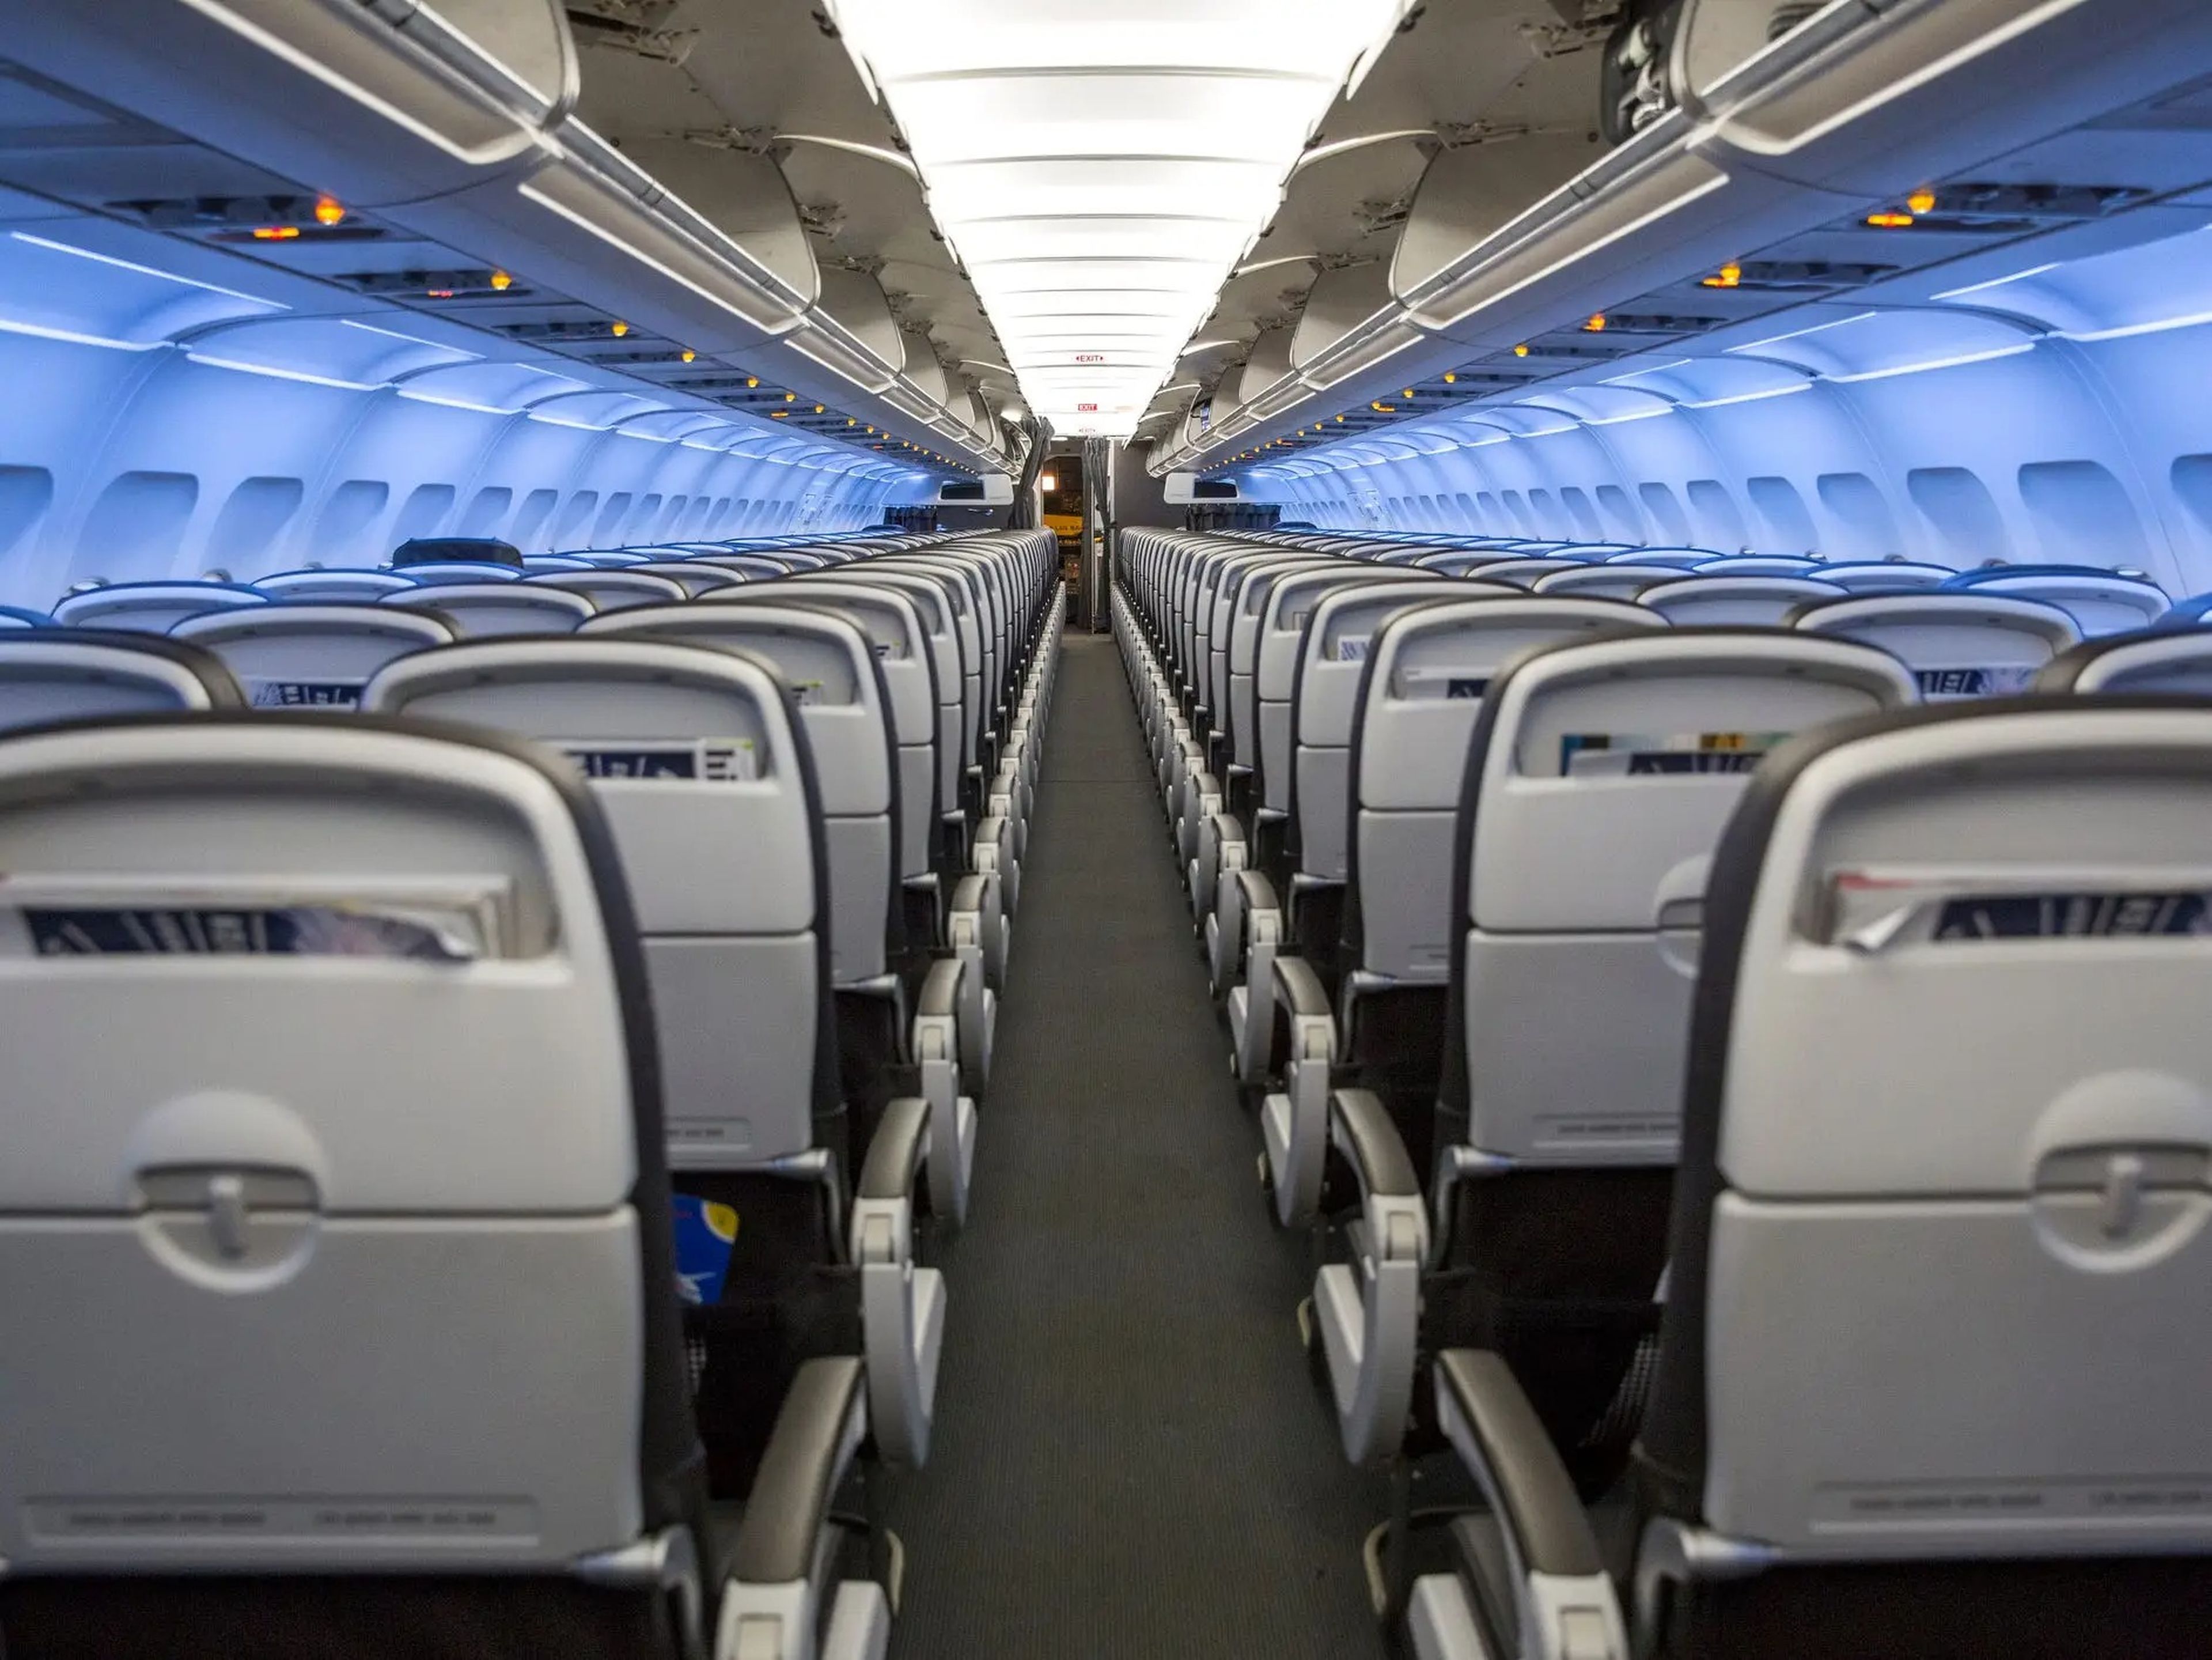 The interior of a plane, with empty seats.